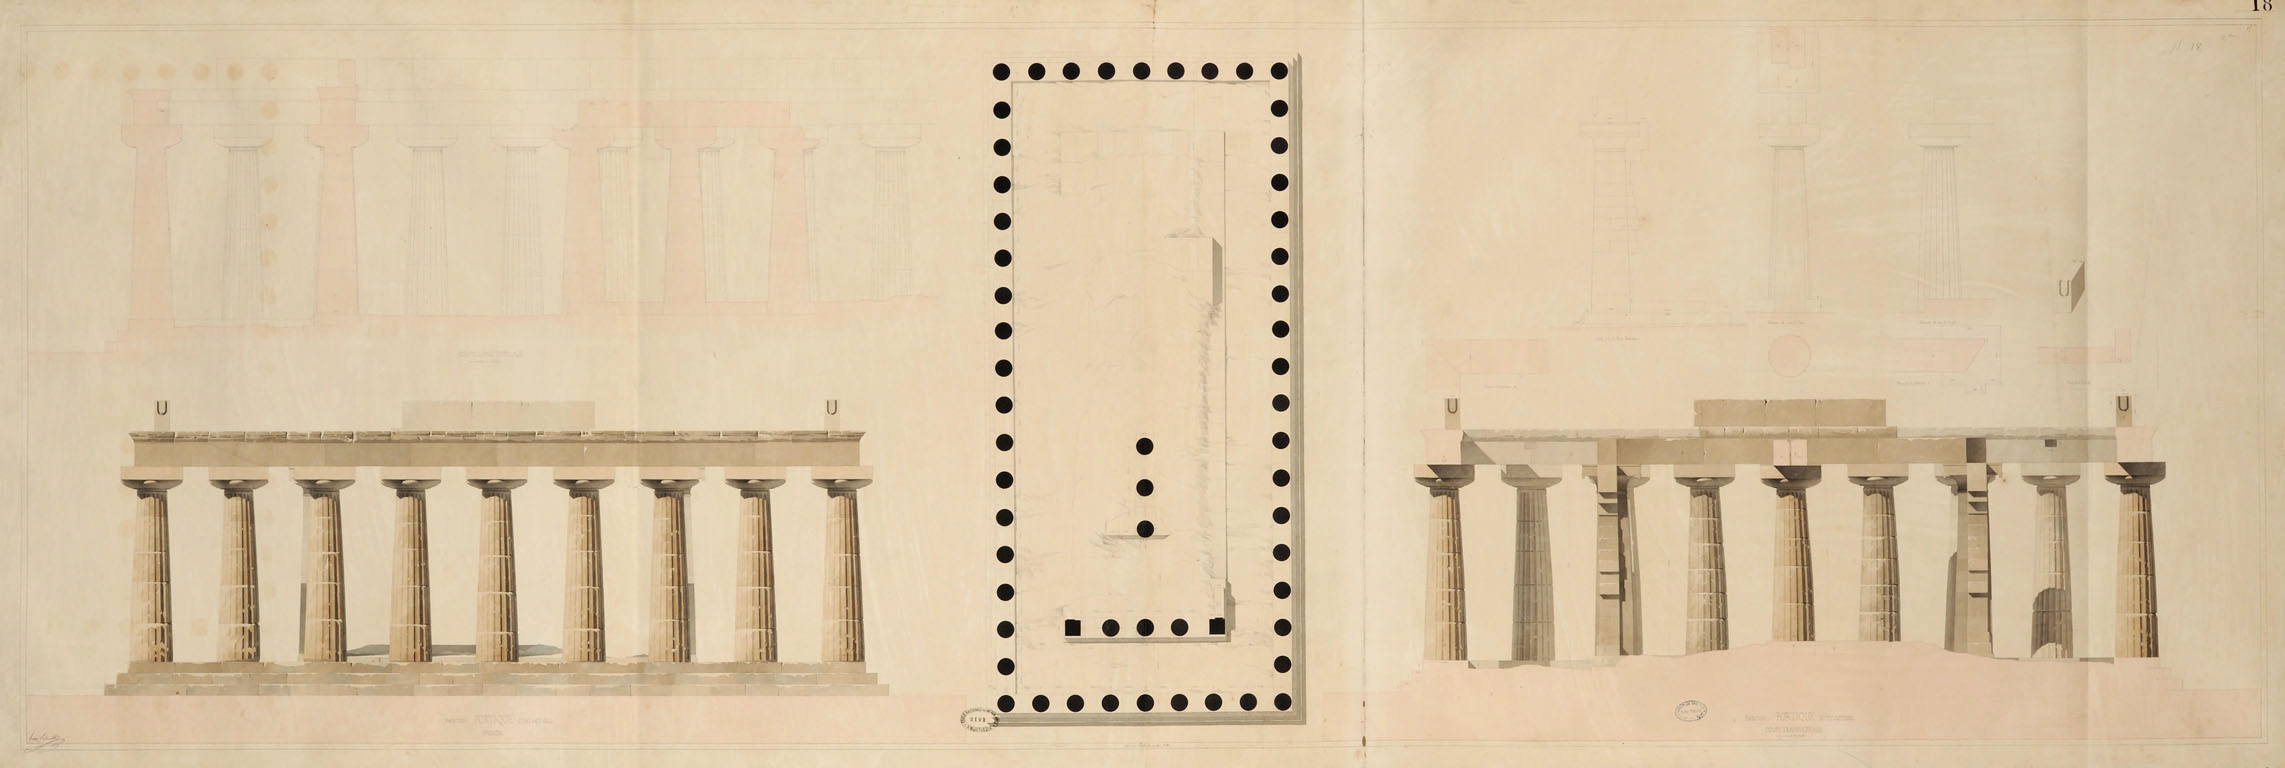 Henri Labrouste: Survey and Conjectural Reconstruction of the Temple of Hera, Paestum (1830) © Bibliothèque National de France